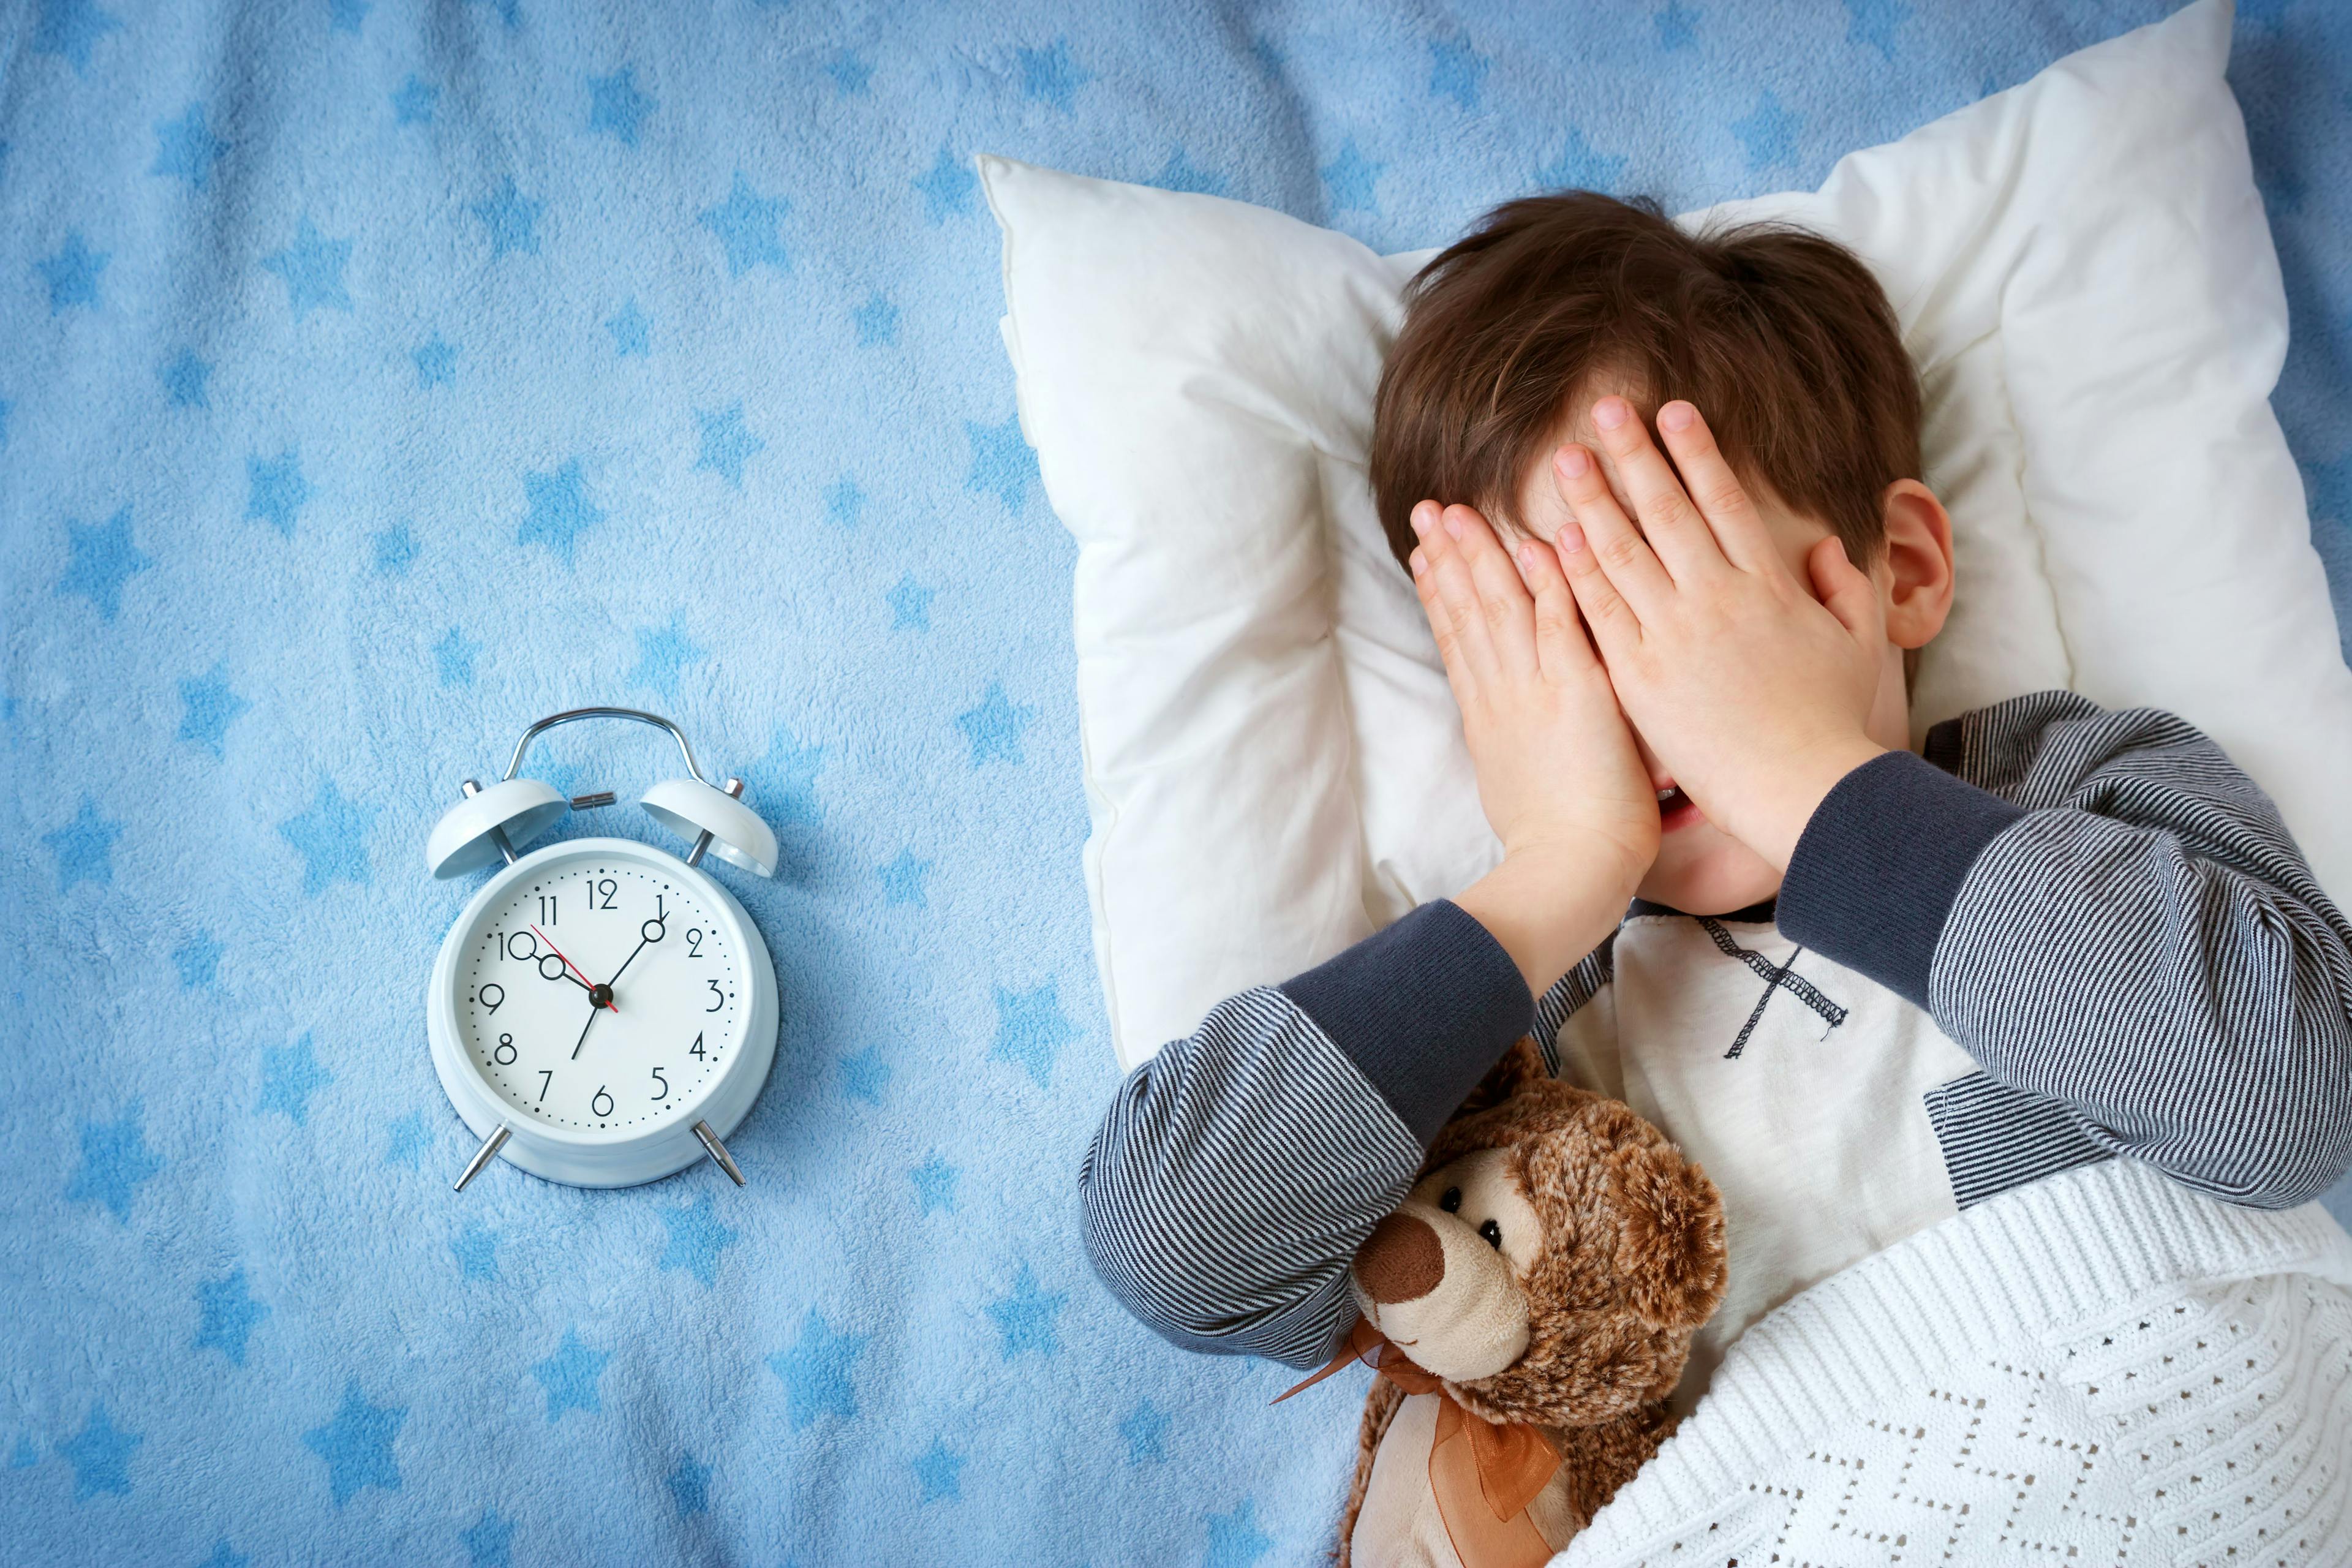 What is the impact of ADHD on sleep? Researchers performed a systematic review and meta-analysis of objectively measured sleep in children and adolescents with ADHD.